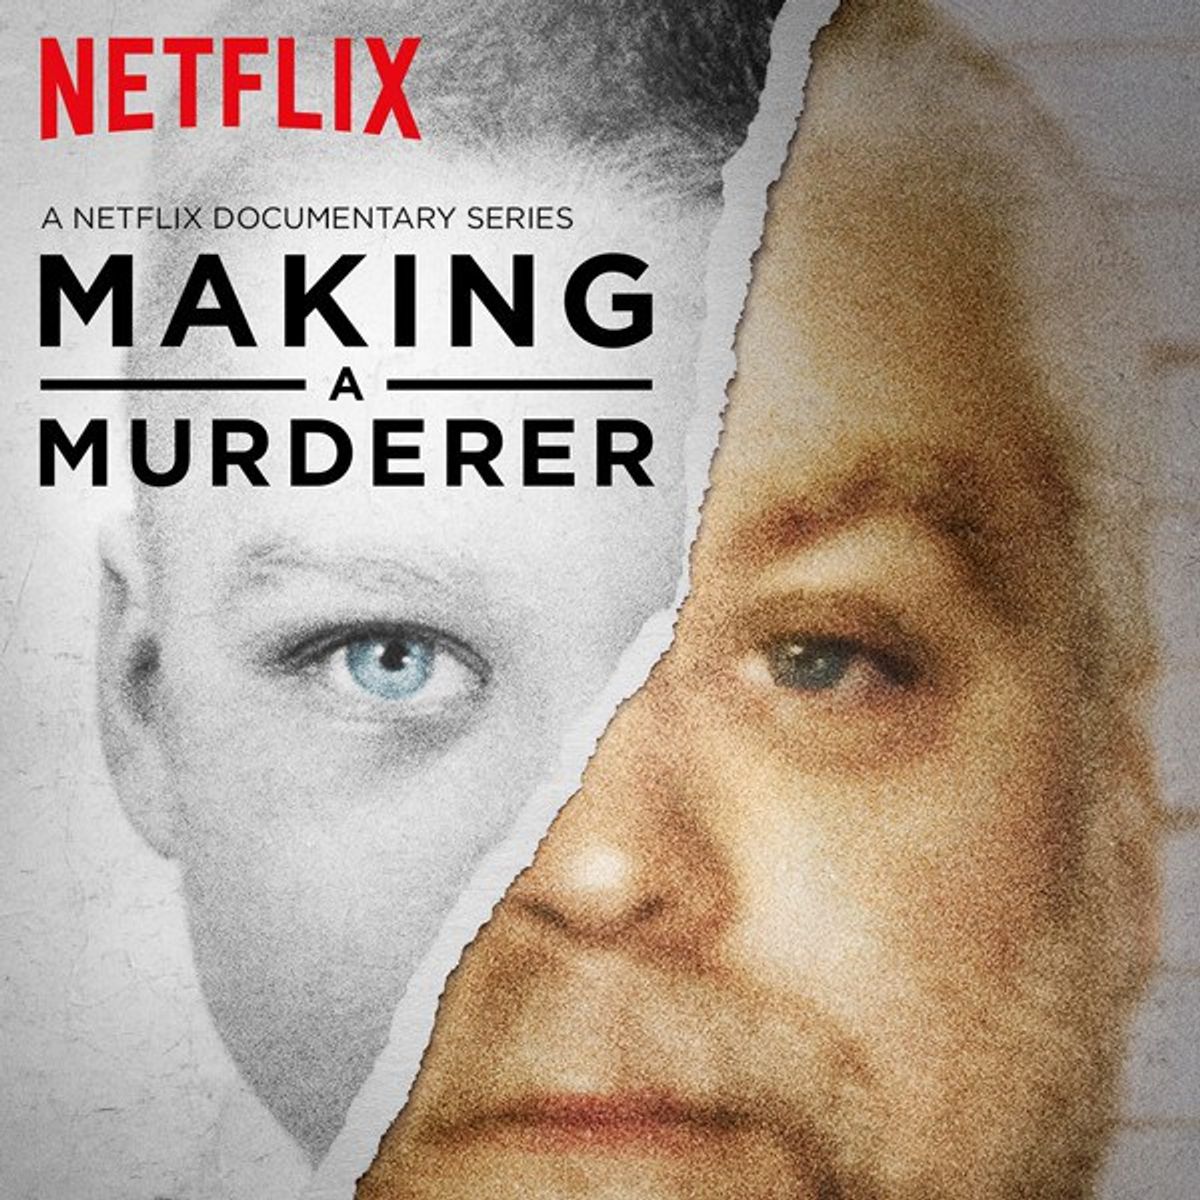 10 Thoughts I Had While Watching 'Making a Murderer'